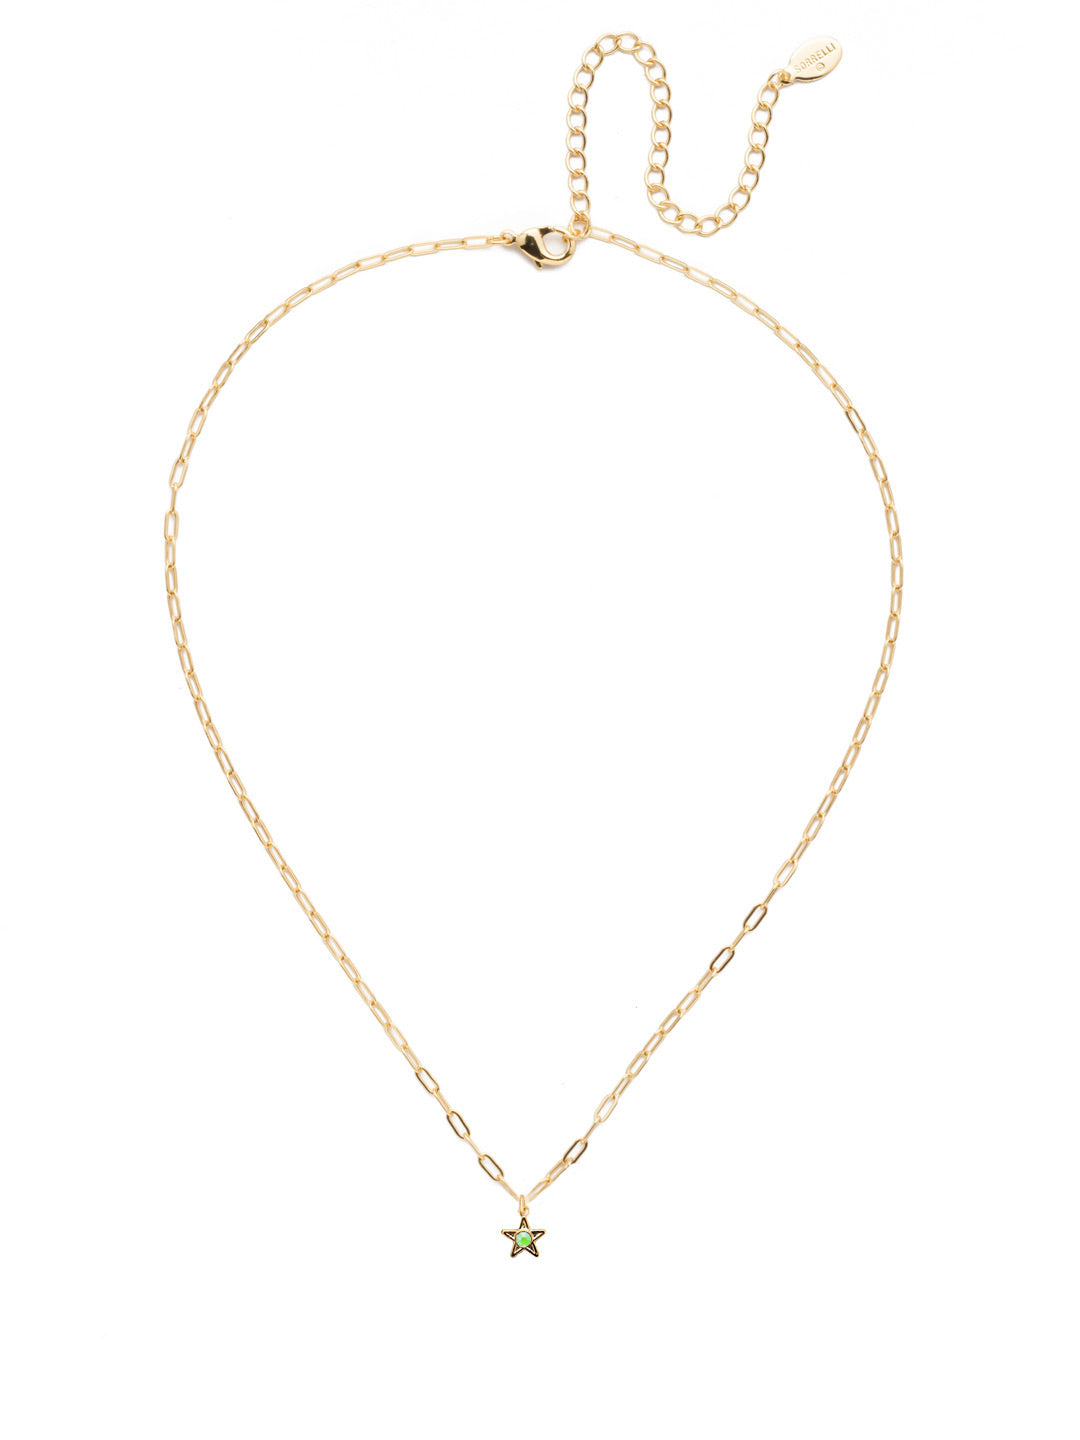 Asteria Pendant Necklace - NFL89BGETG - <p>The Asteria Pendant Necklace features a single crystal embellished star charm dangling from an adjustable chain, secured by a lobster claw clasp. From Sorrelli's Electric Green  collection in our Bright Gold-tone finish.</p>